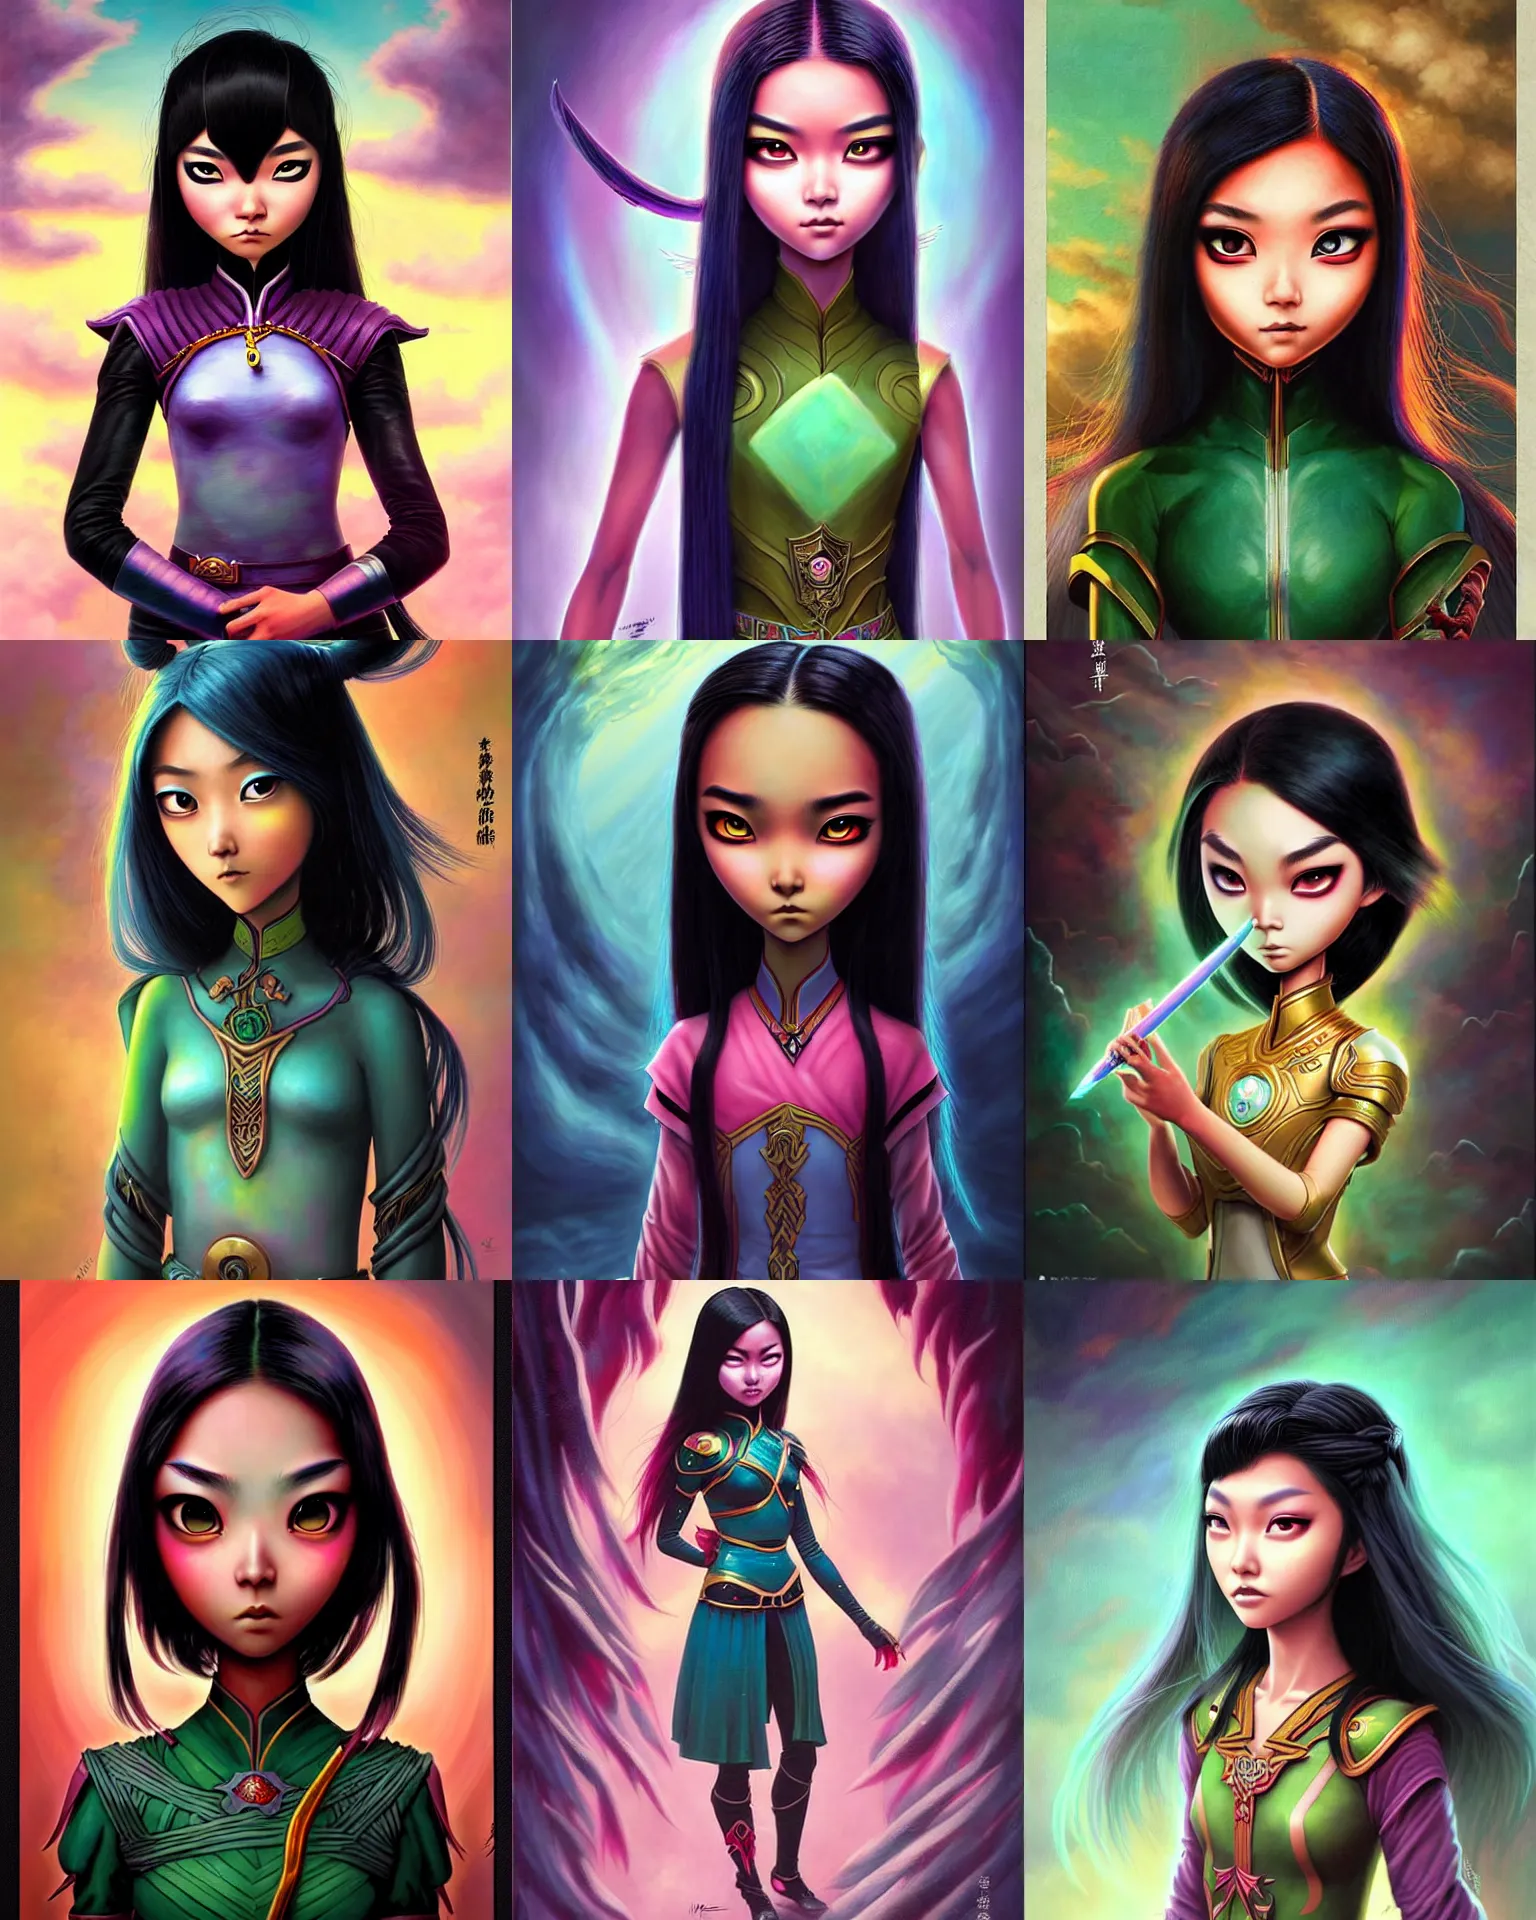 Prompt: an epic fantasy comic book style painting of a young malaysian woman as jade chan, expressive, pastel palette, dark piercing eyes, tan skin, beautiful futuristic hair style, awesome pose, character design by mark ryden pixar hayao miyazaki, ue 5